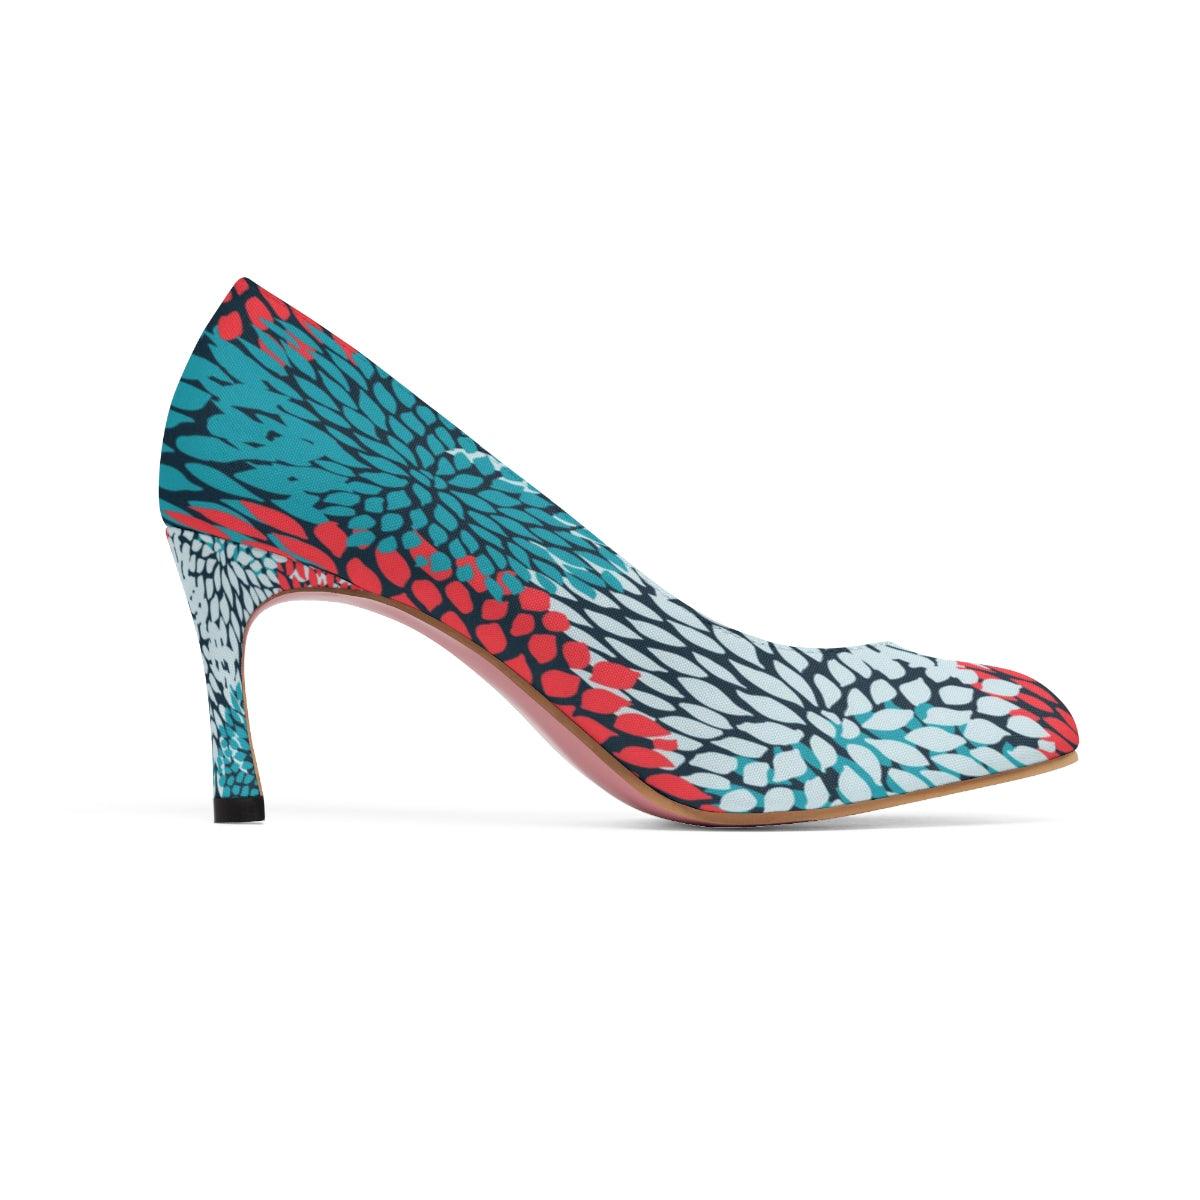 Colorful Feathers Women's High Heels - Buyashoes